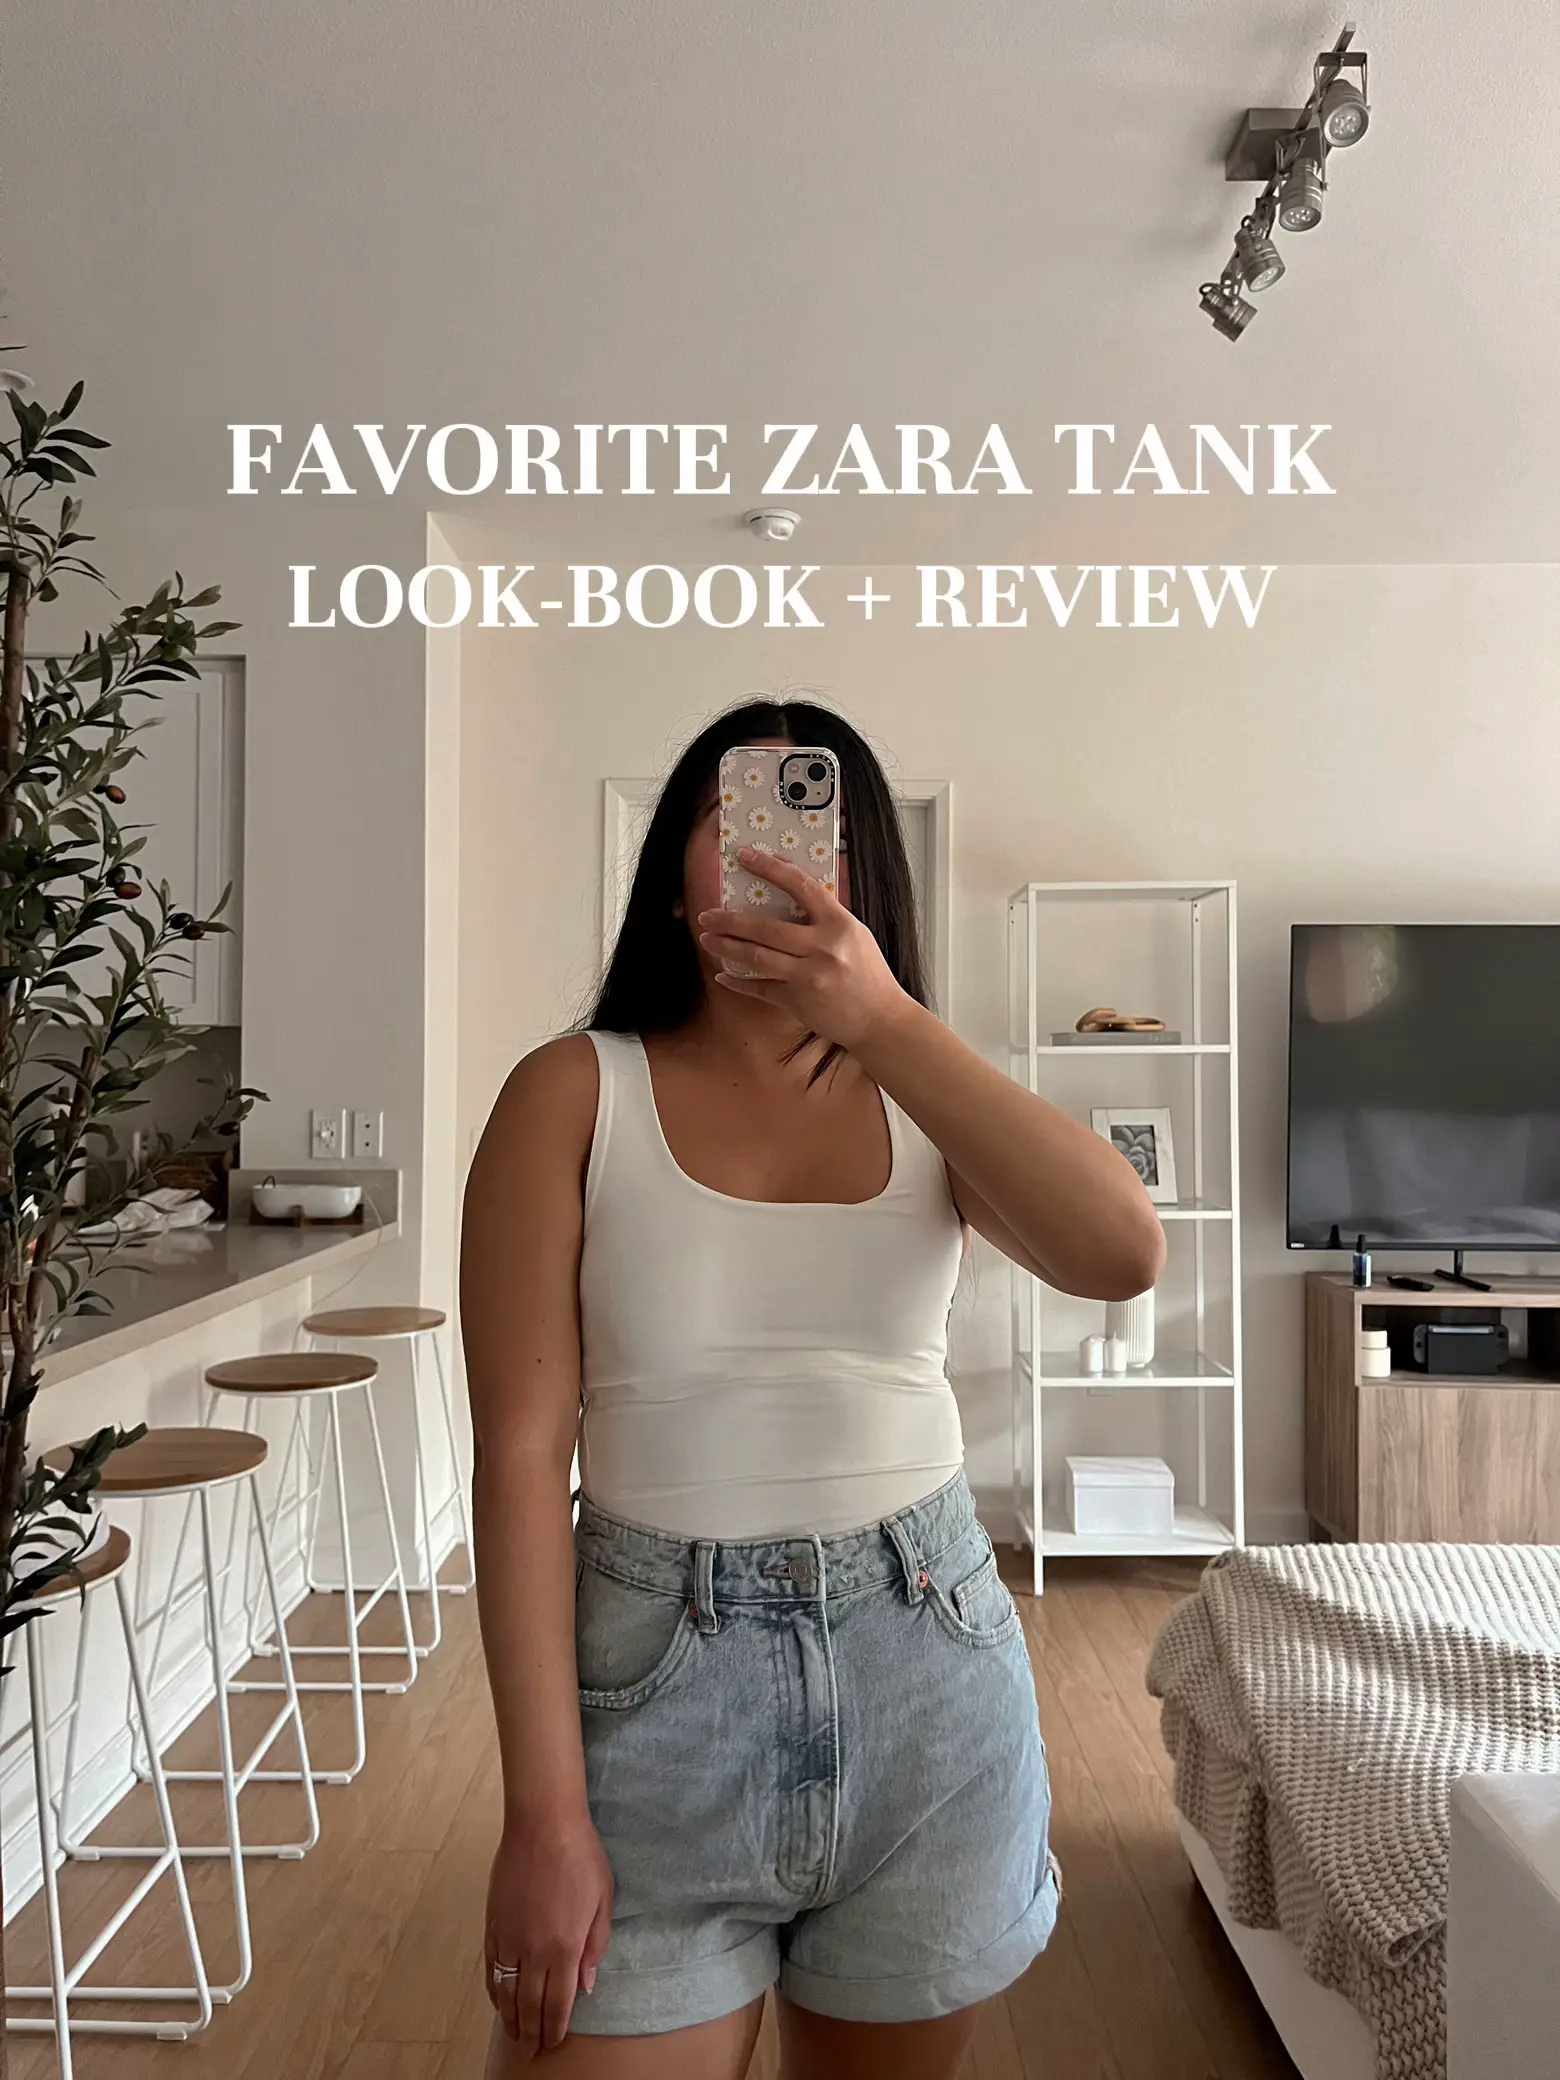 FAVORITE ZARA TANK: LOOK-BOOK + REVIEW 🖤, Gallery posted by ashleytgaras